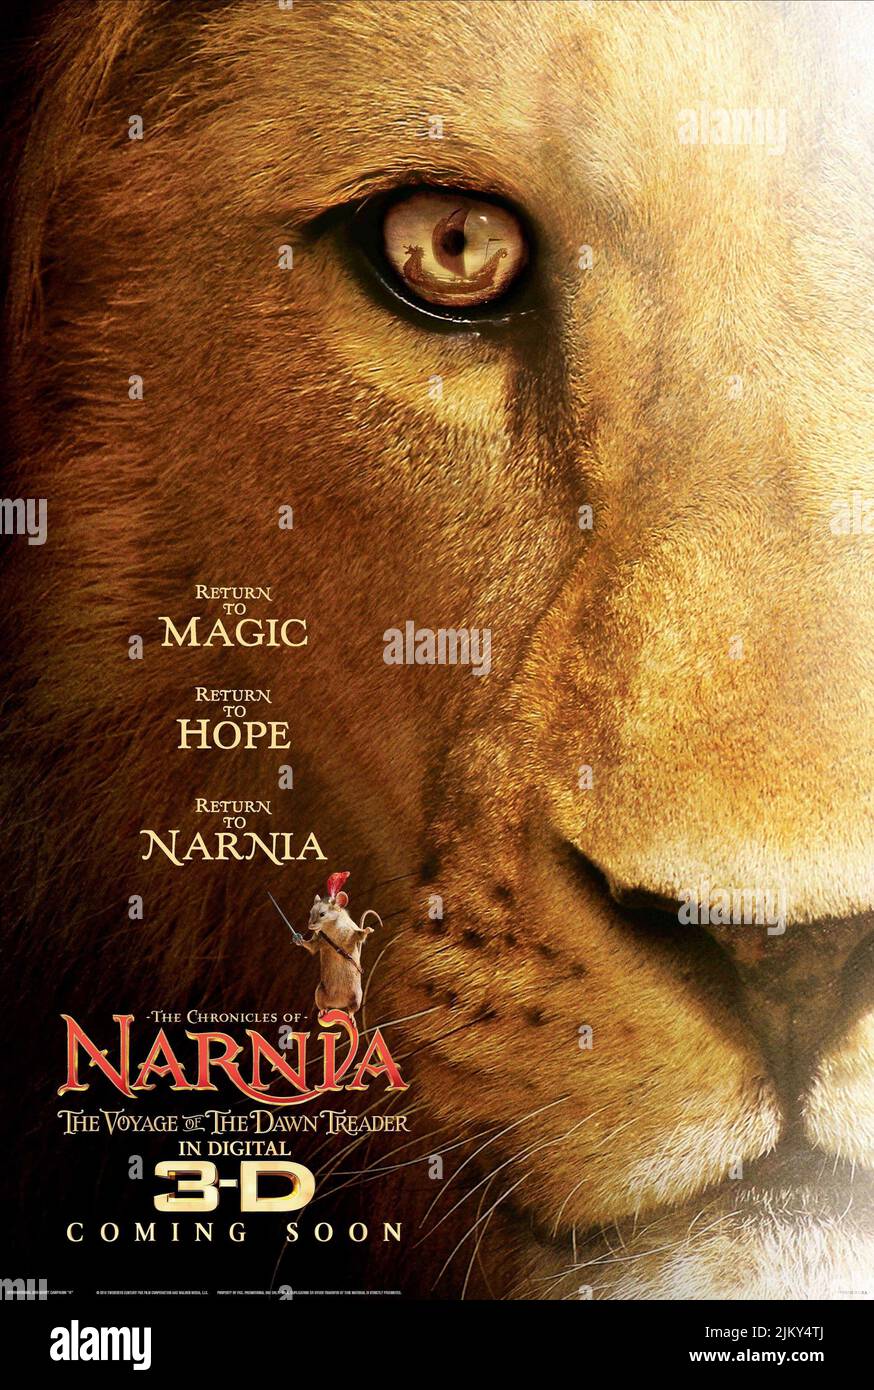 Aslan's Voice Lines in All 3 Movies of The Chronicles of Narnia